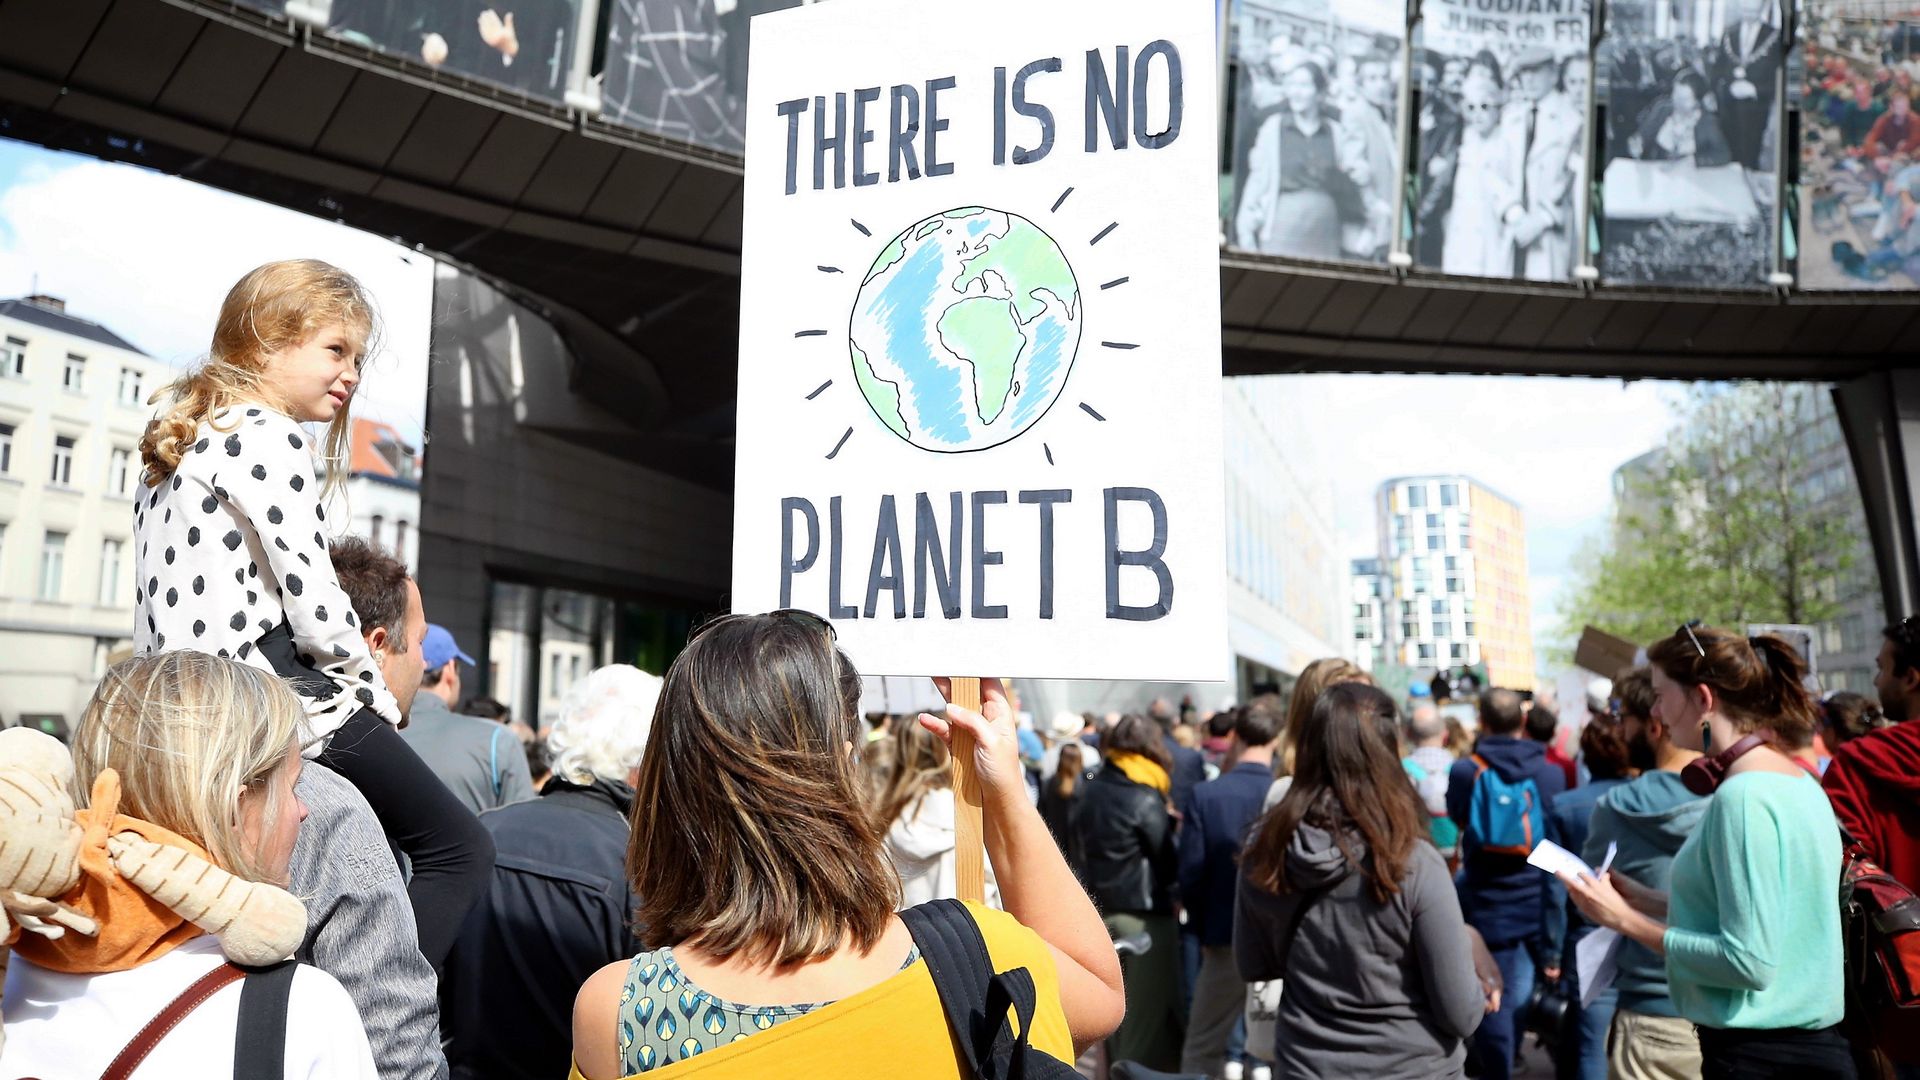 Demonstrators walking, one holding a sign that reads "There is no planet B"